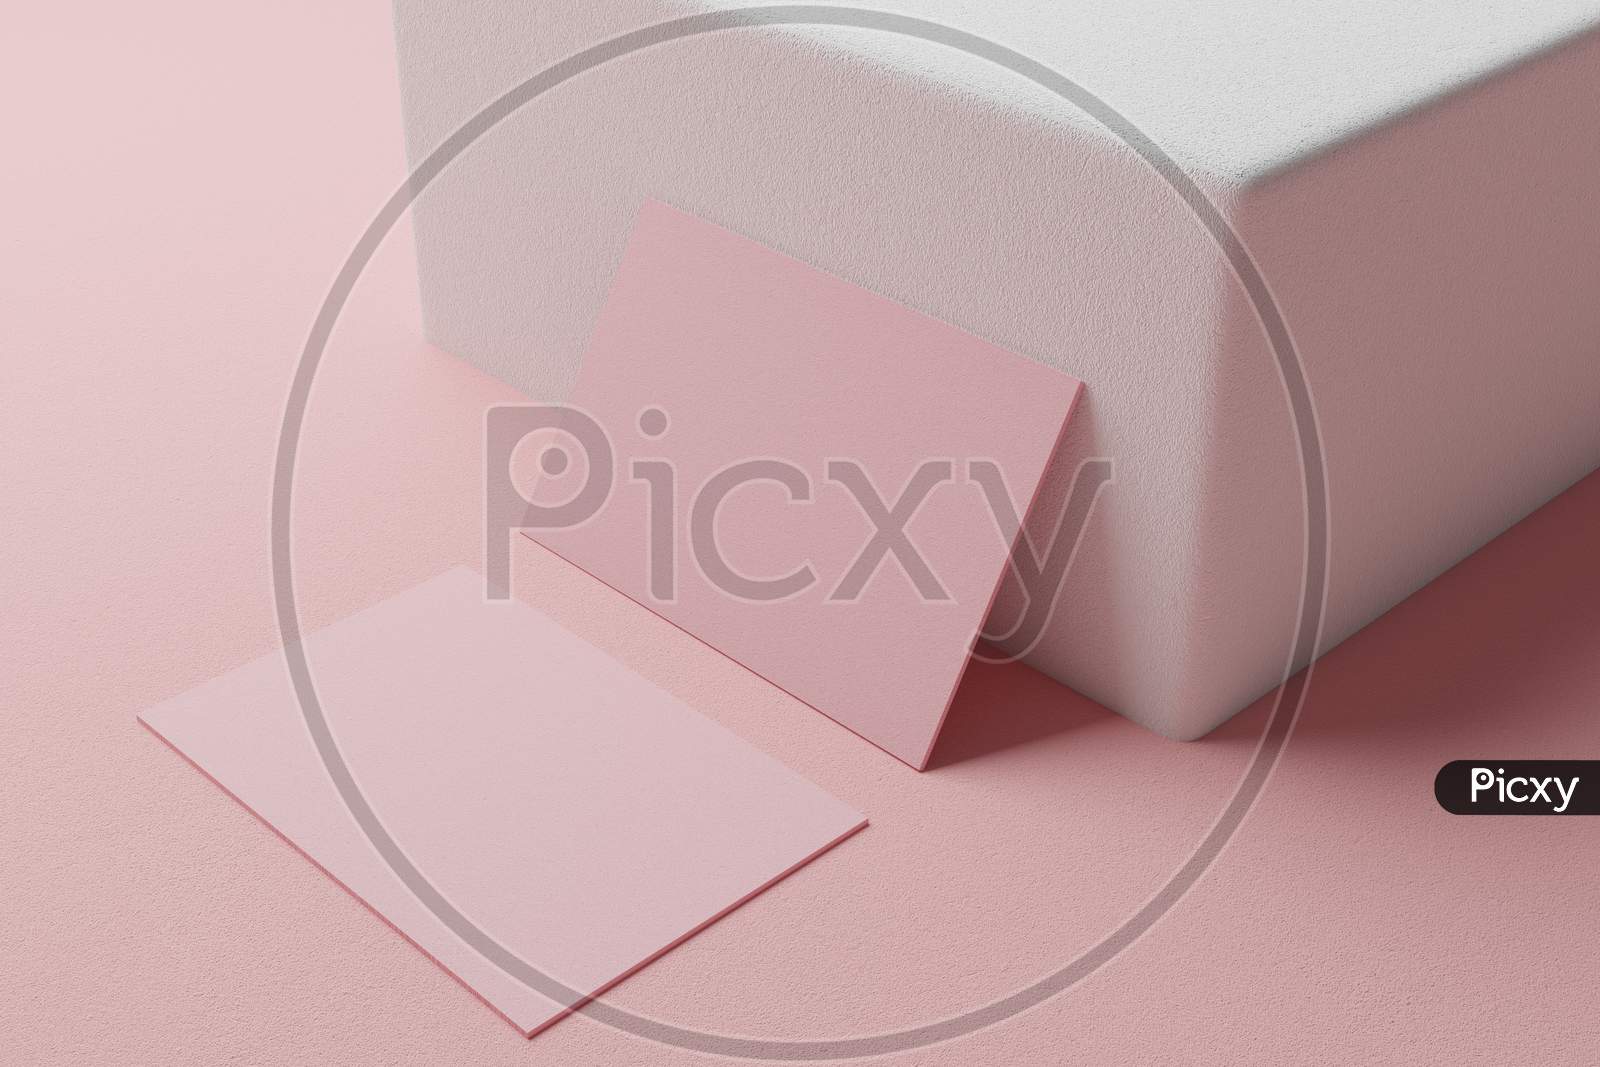 Pink Pastel Business Card Paper Mockup Template With Blank Space Cover For Insert Company Logo Or Personal Identity On Cardboard Background. Modern Style Stationery Concept. 3D Illustration Render